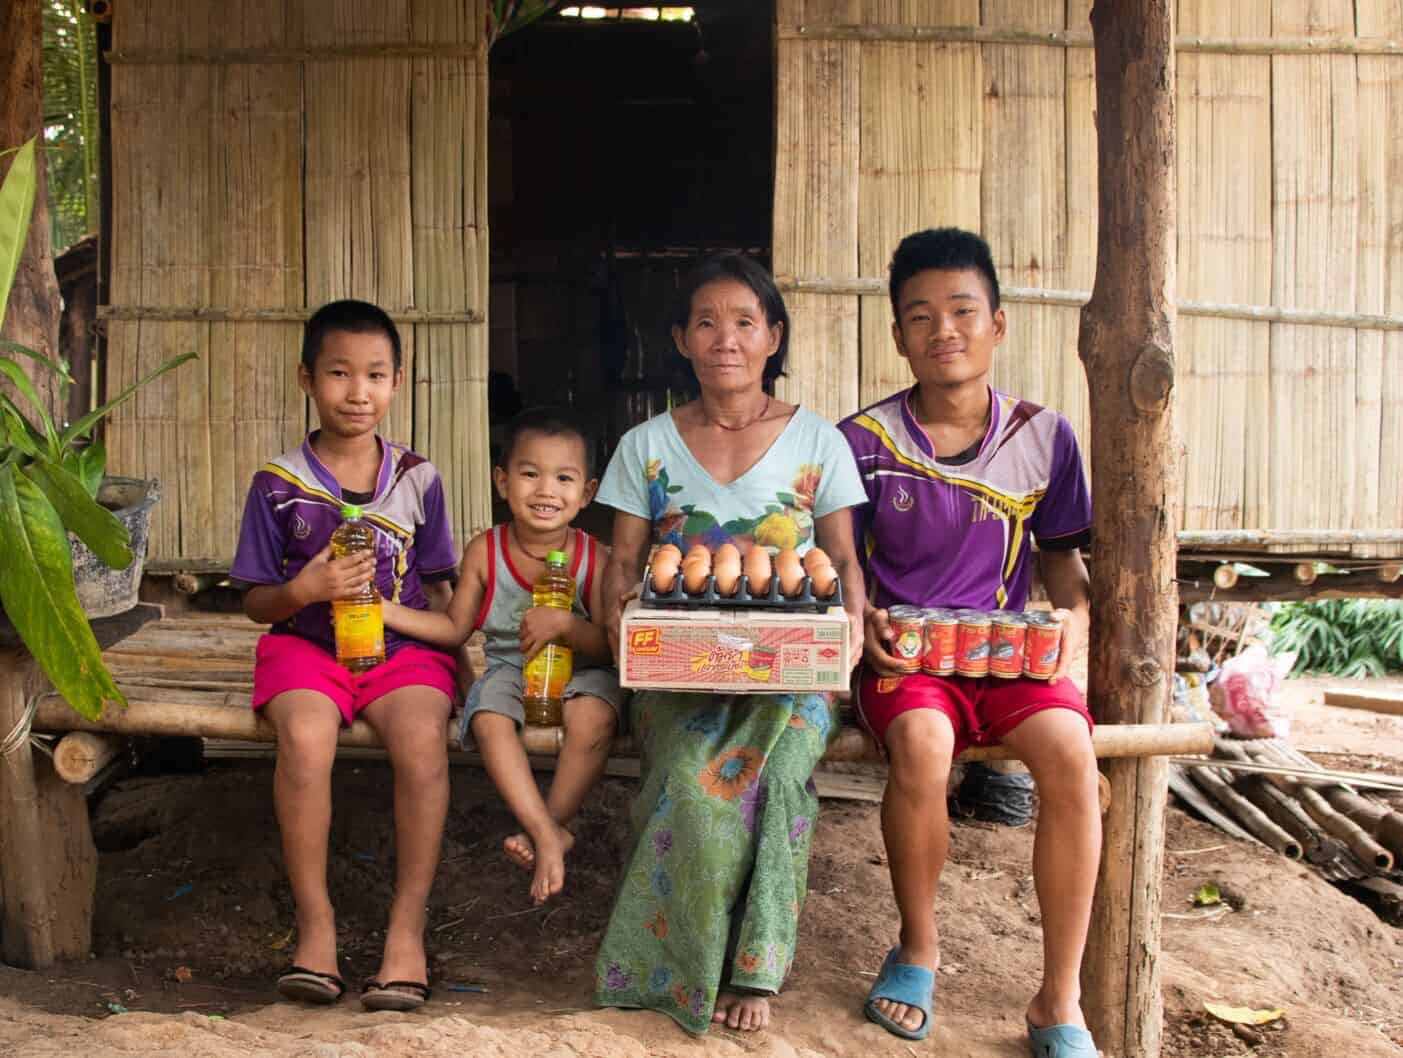 A woman and three children hold food in their laps.